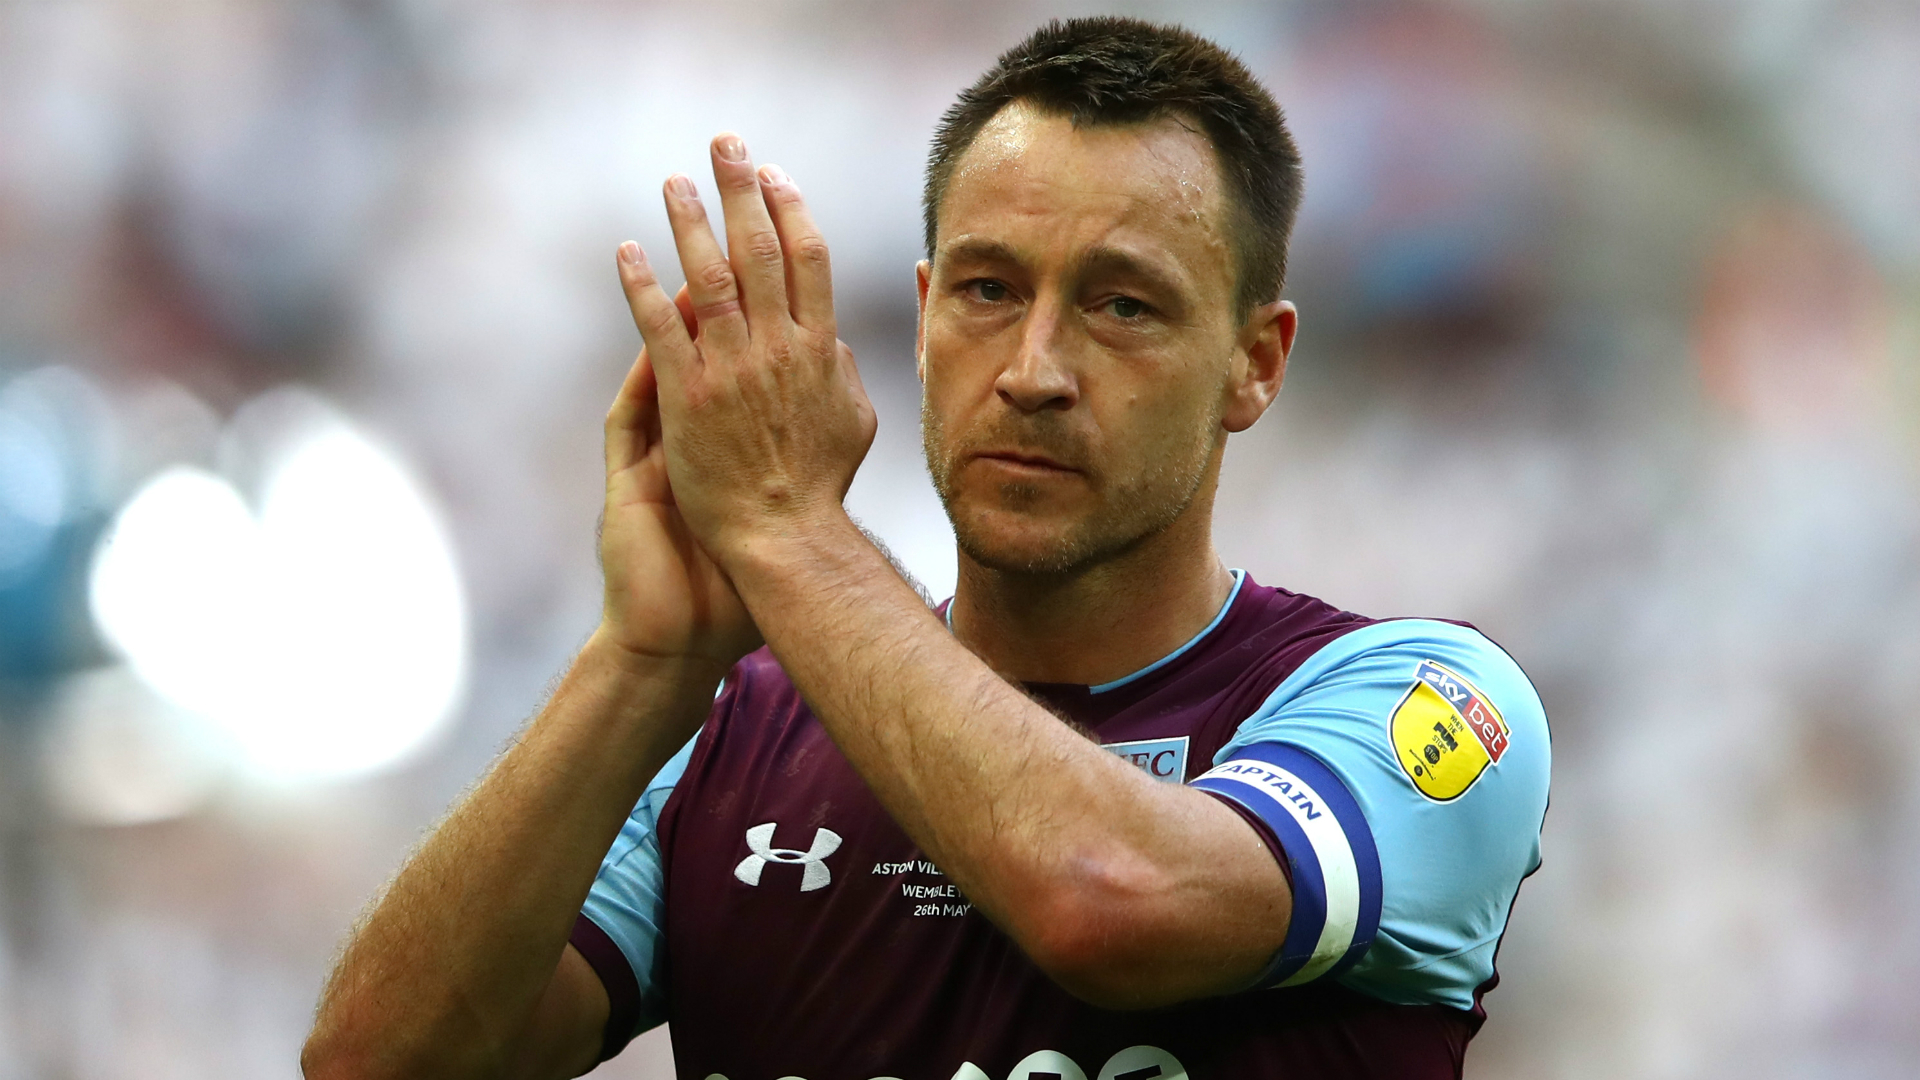 John Terry is still waiting for another playing opportunity, but he wants to move into management after he retires.